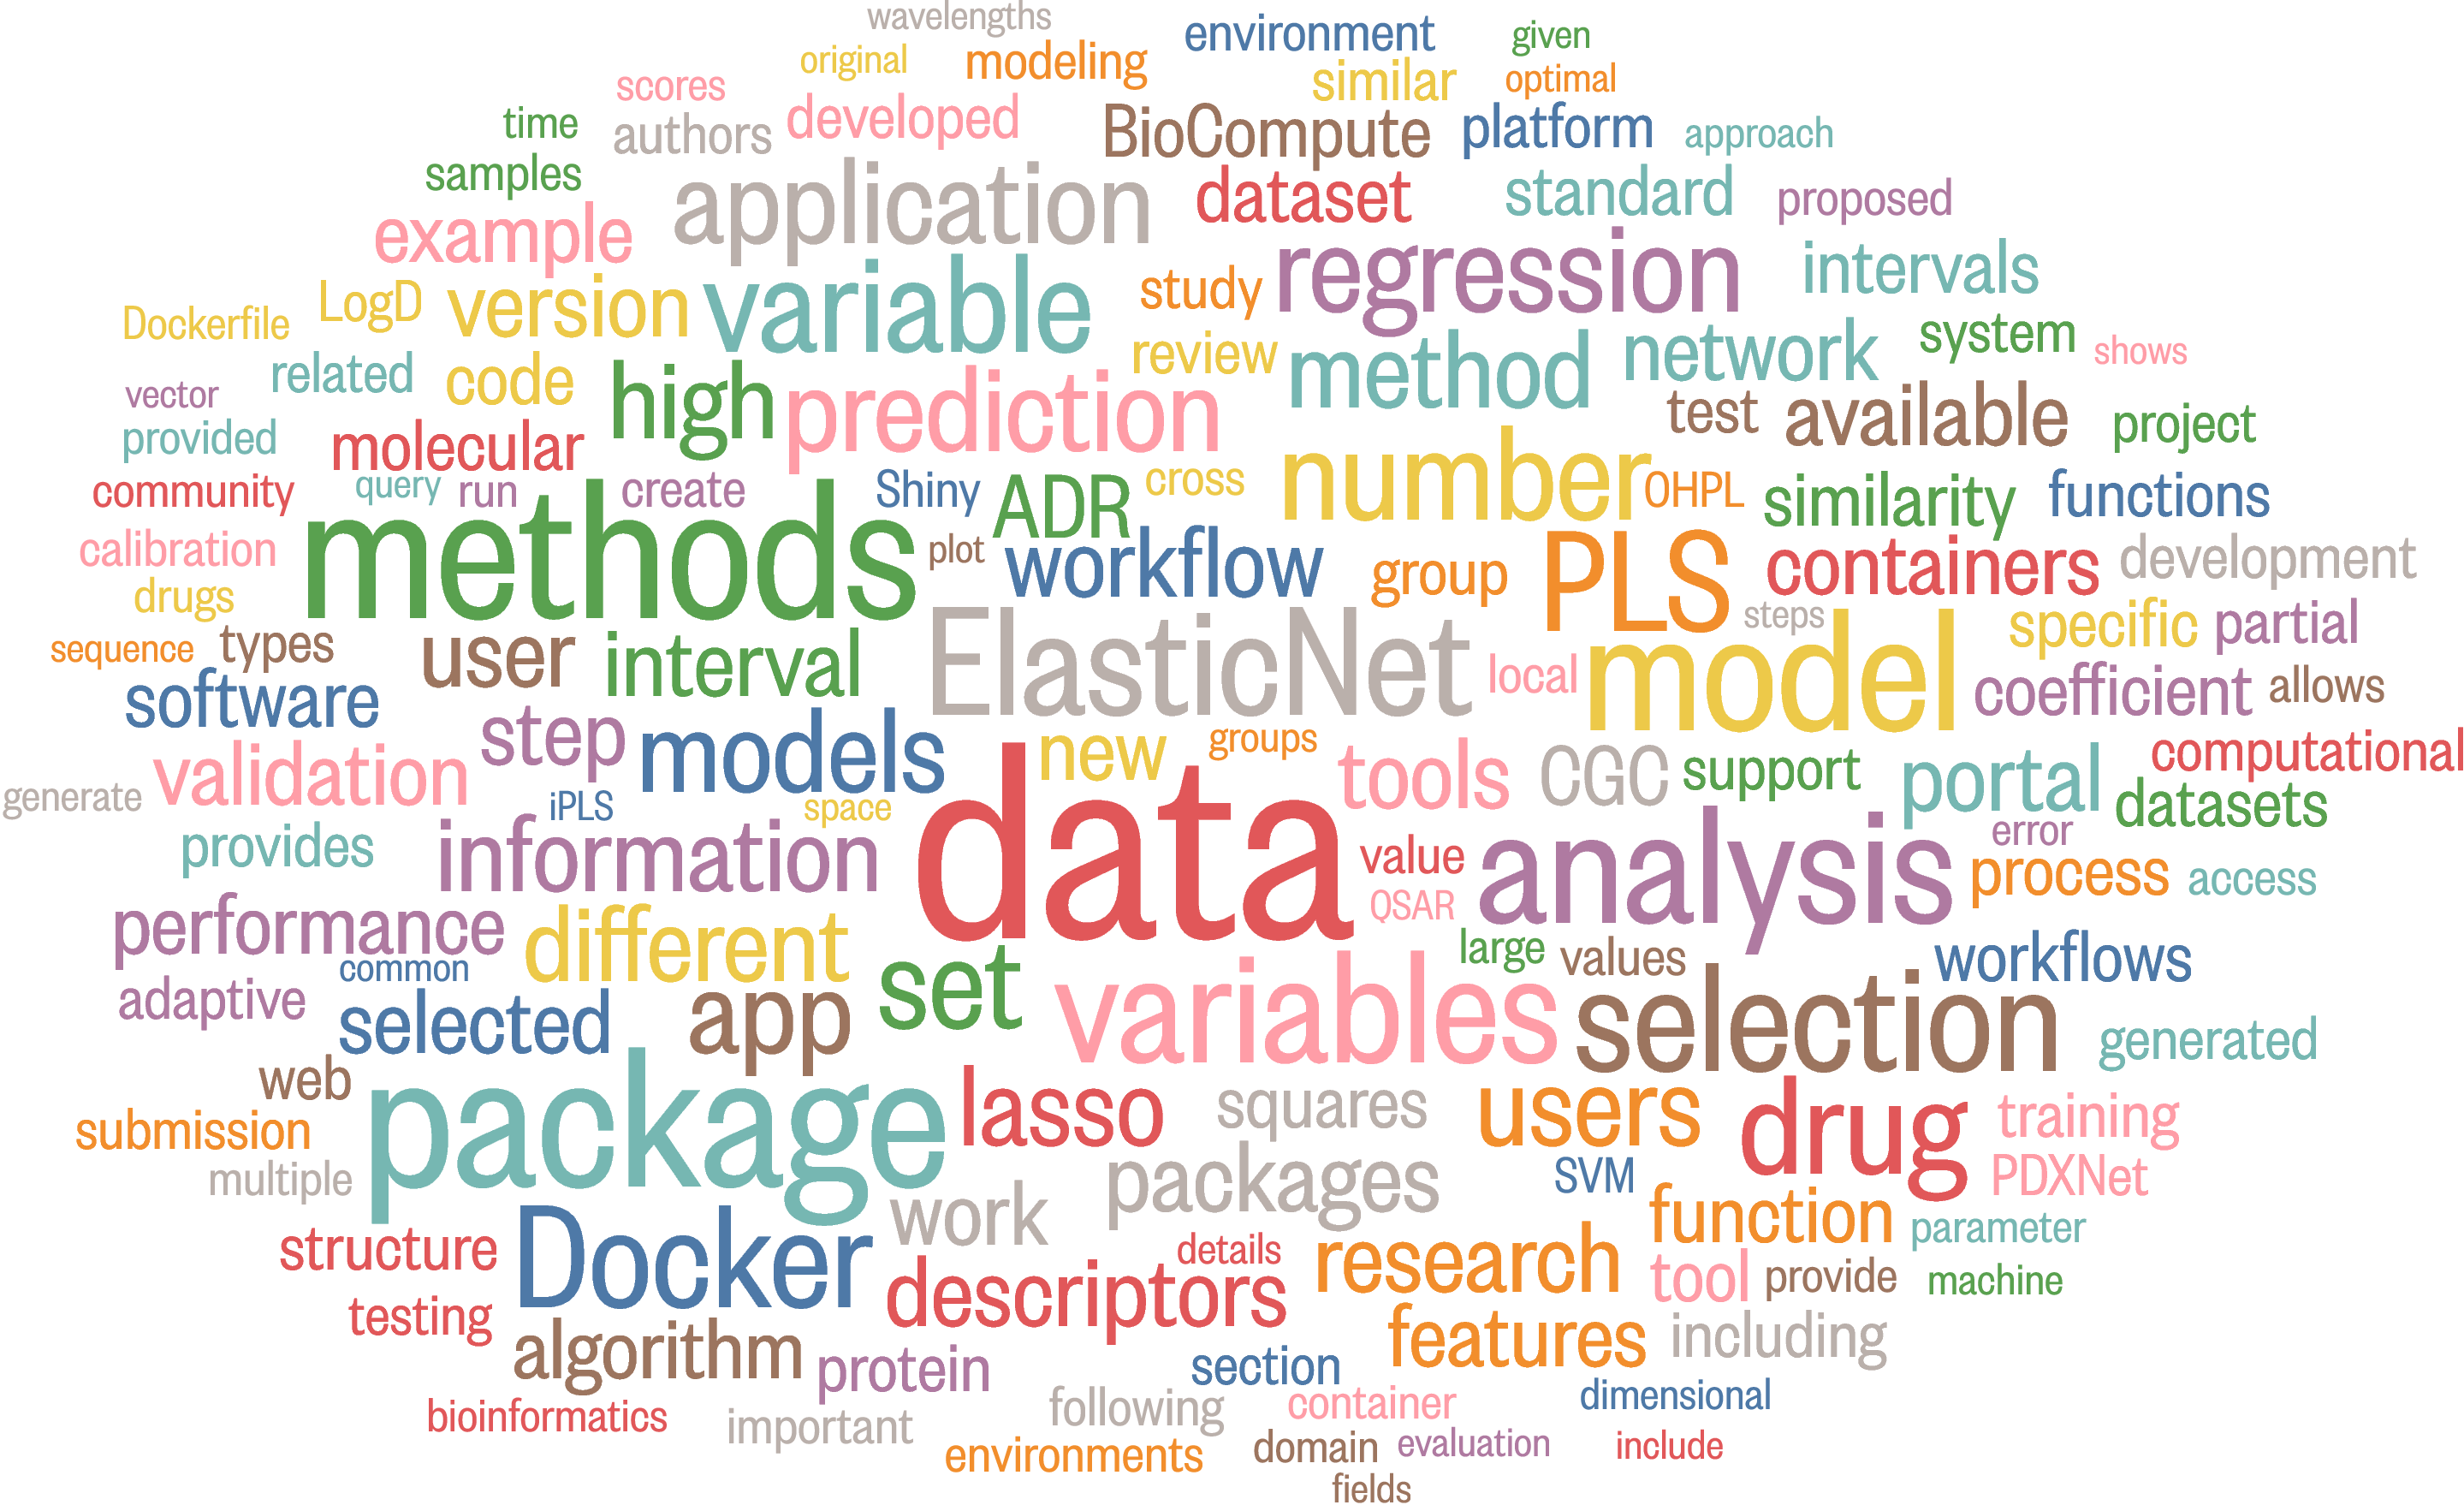 Word cloud visualization of the keywords in my publications.